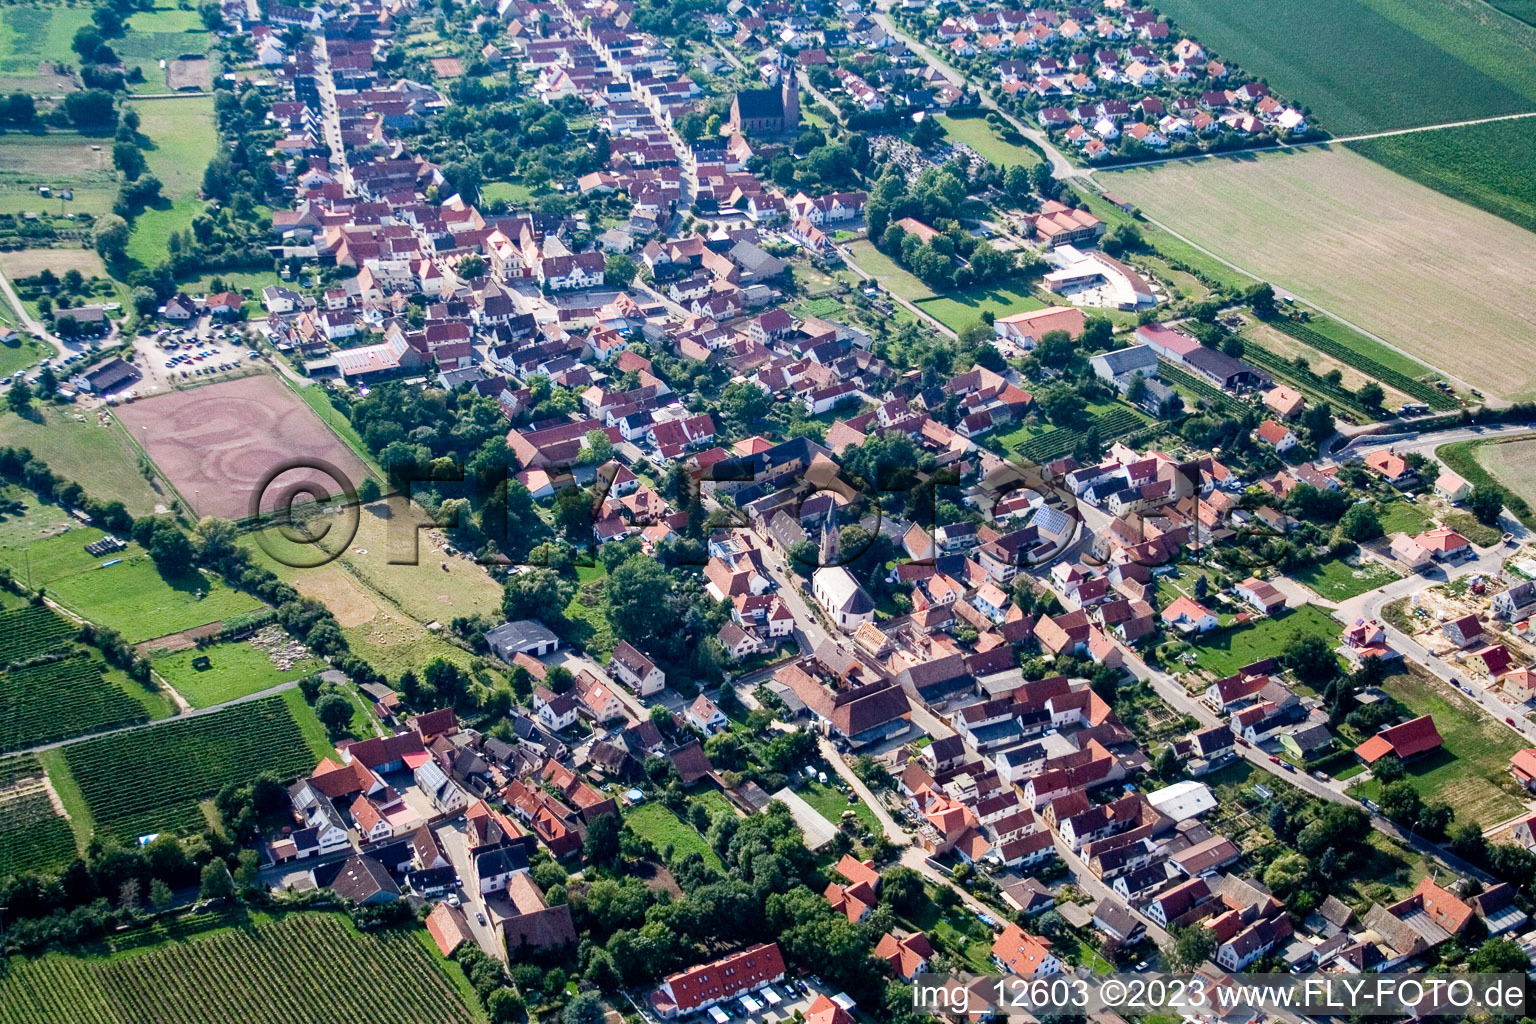 Essingen in the state Rhineland-Palatinate, Germany seen from above